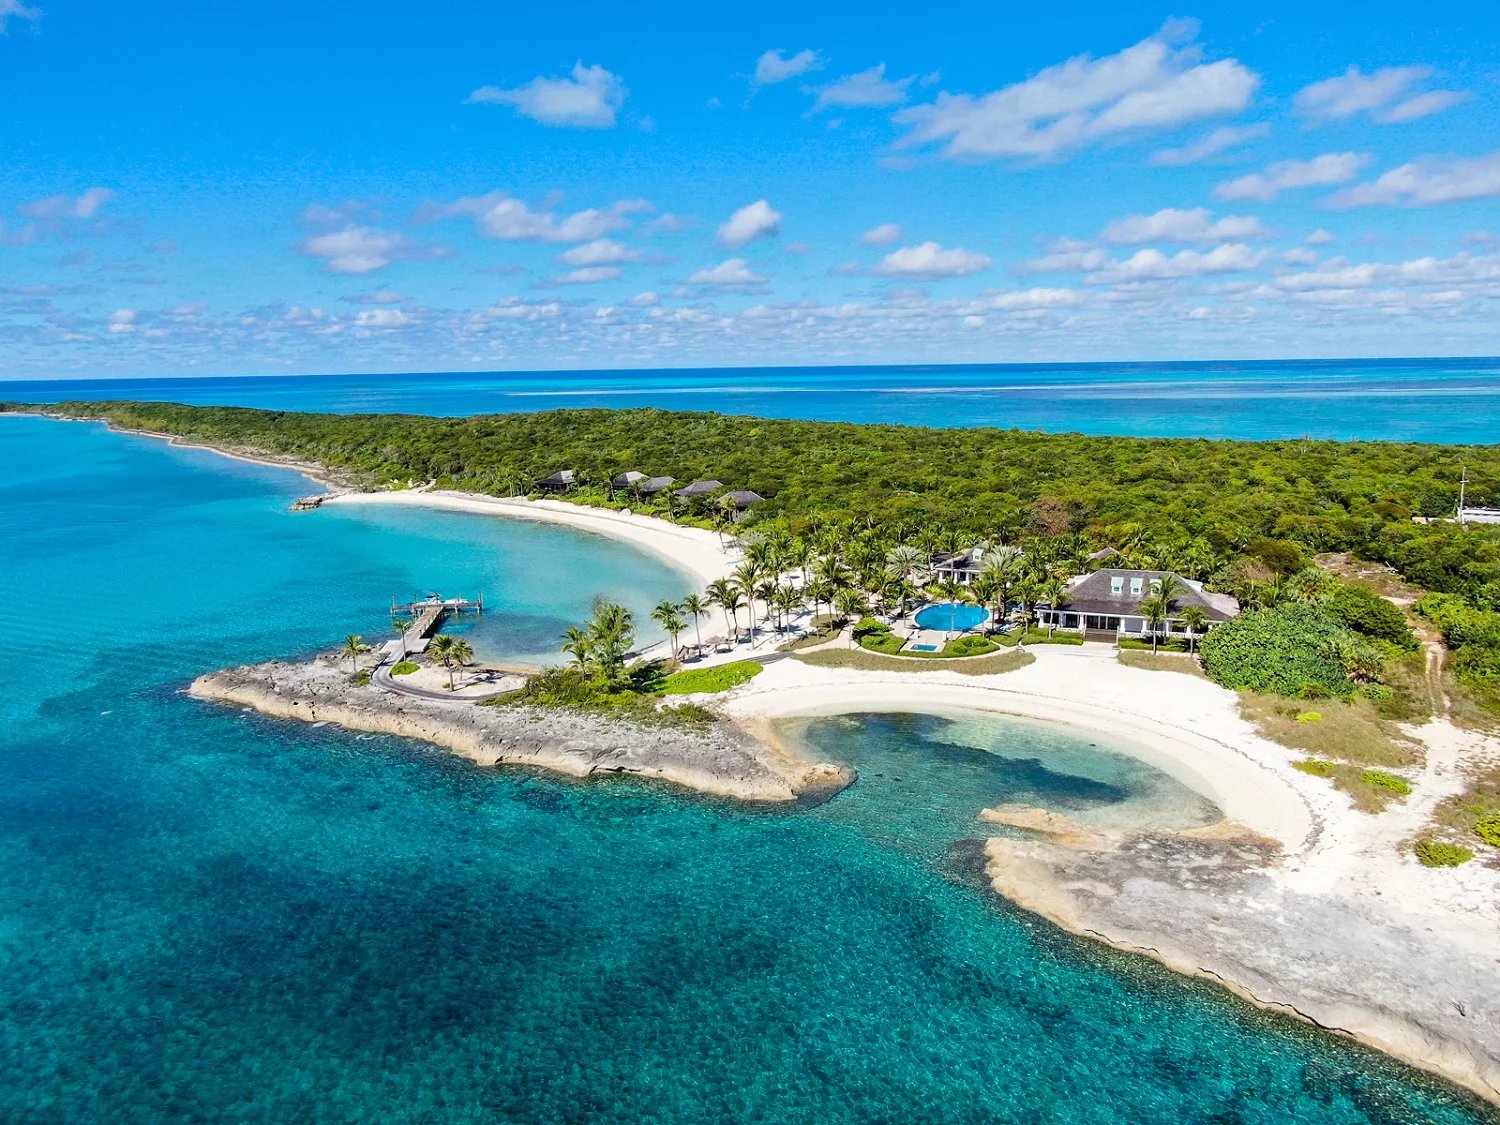 royal island, the perfect private island opportunity - mls 51444 image1